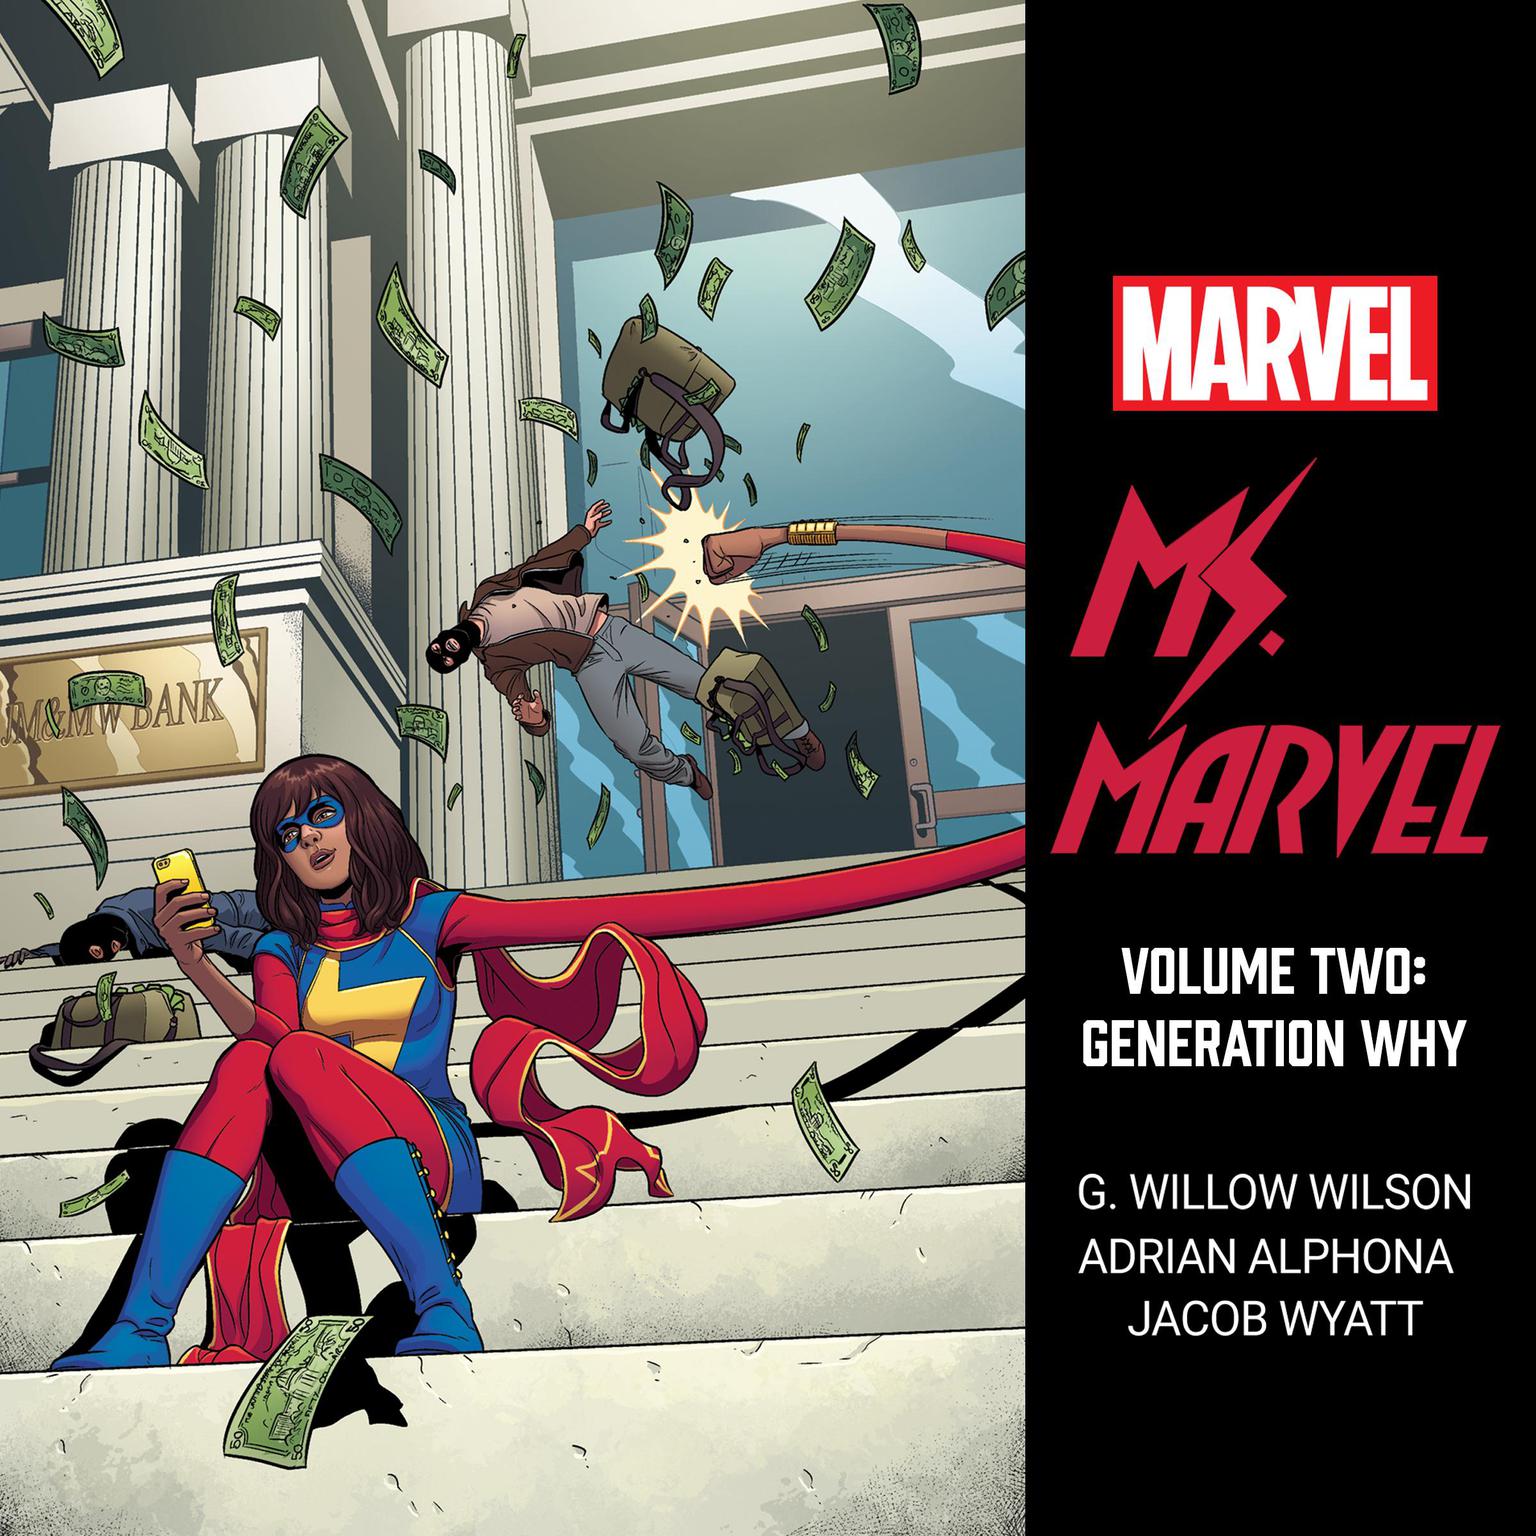 Ms. Marvel Vol. 2: Generation Why Audiobook, by G. Willow Wilson